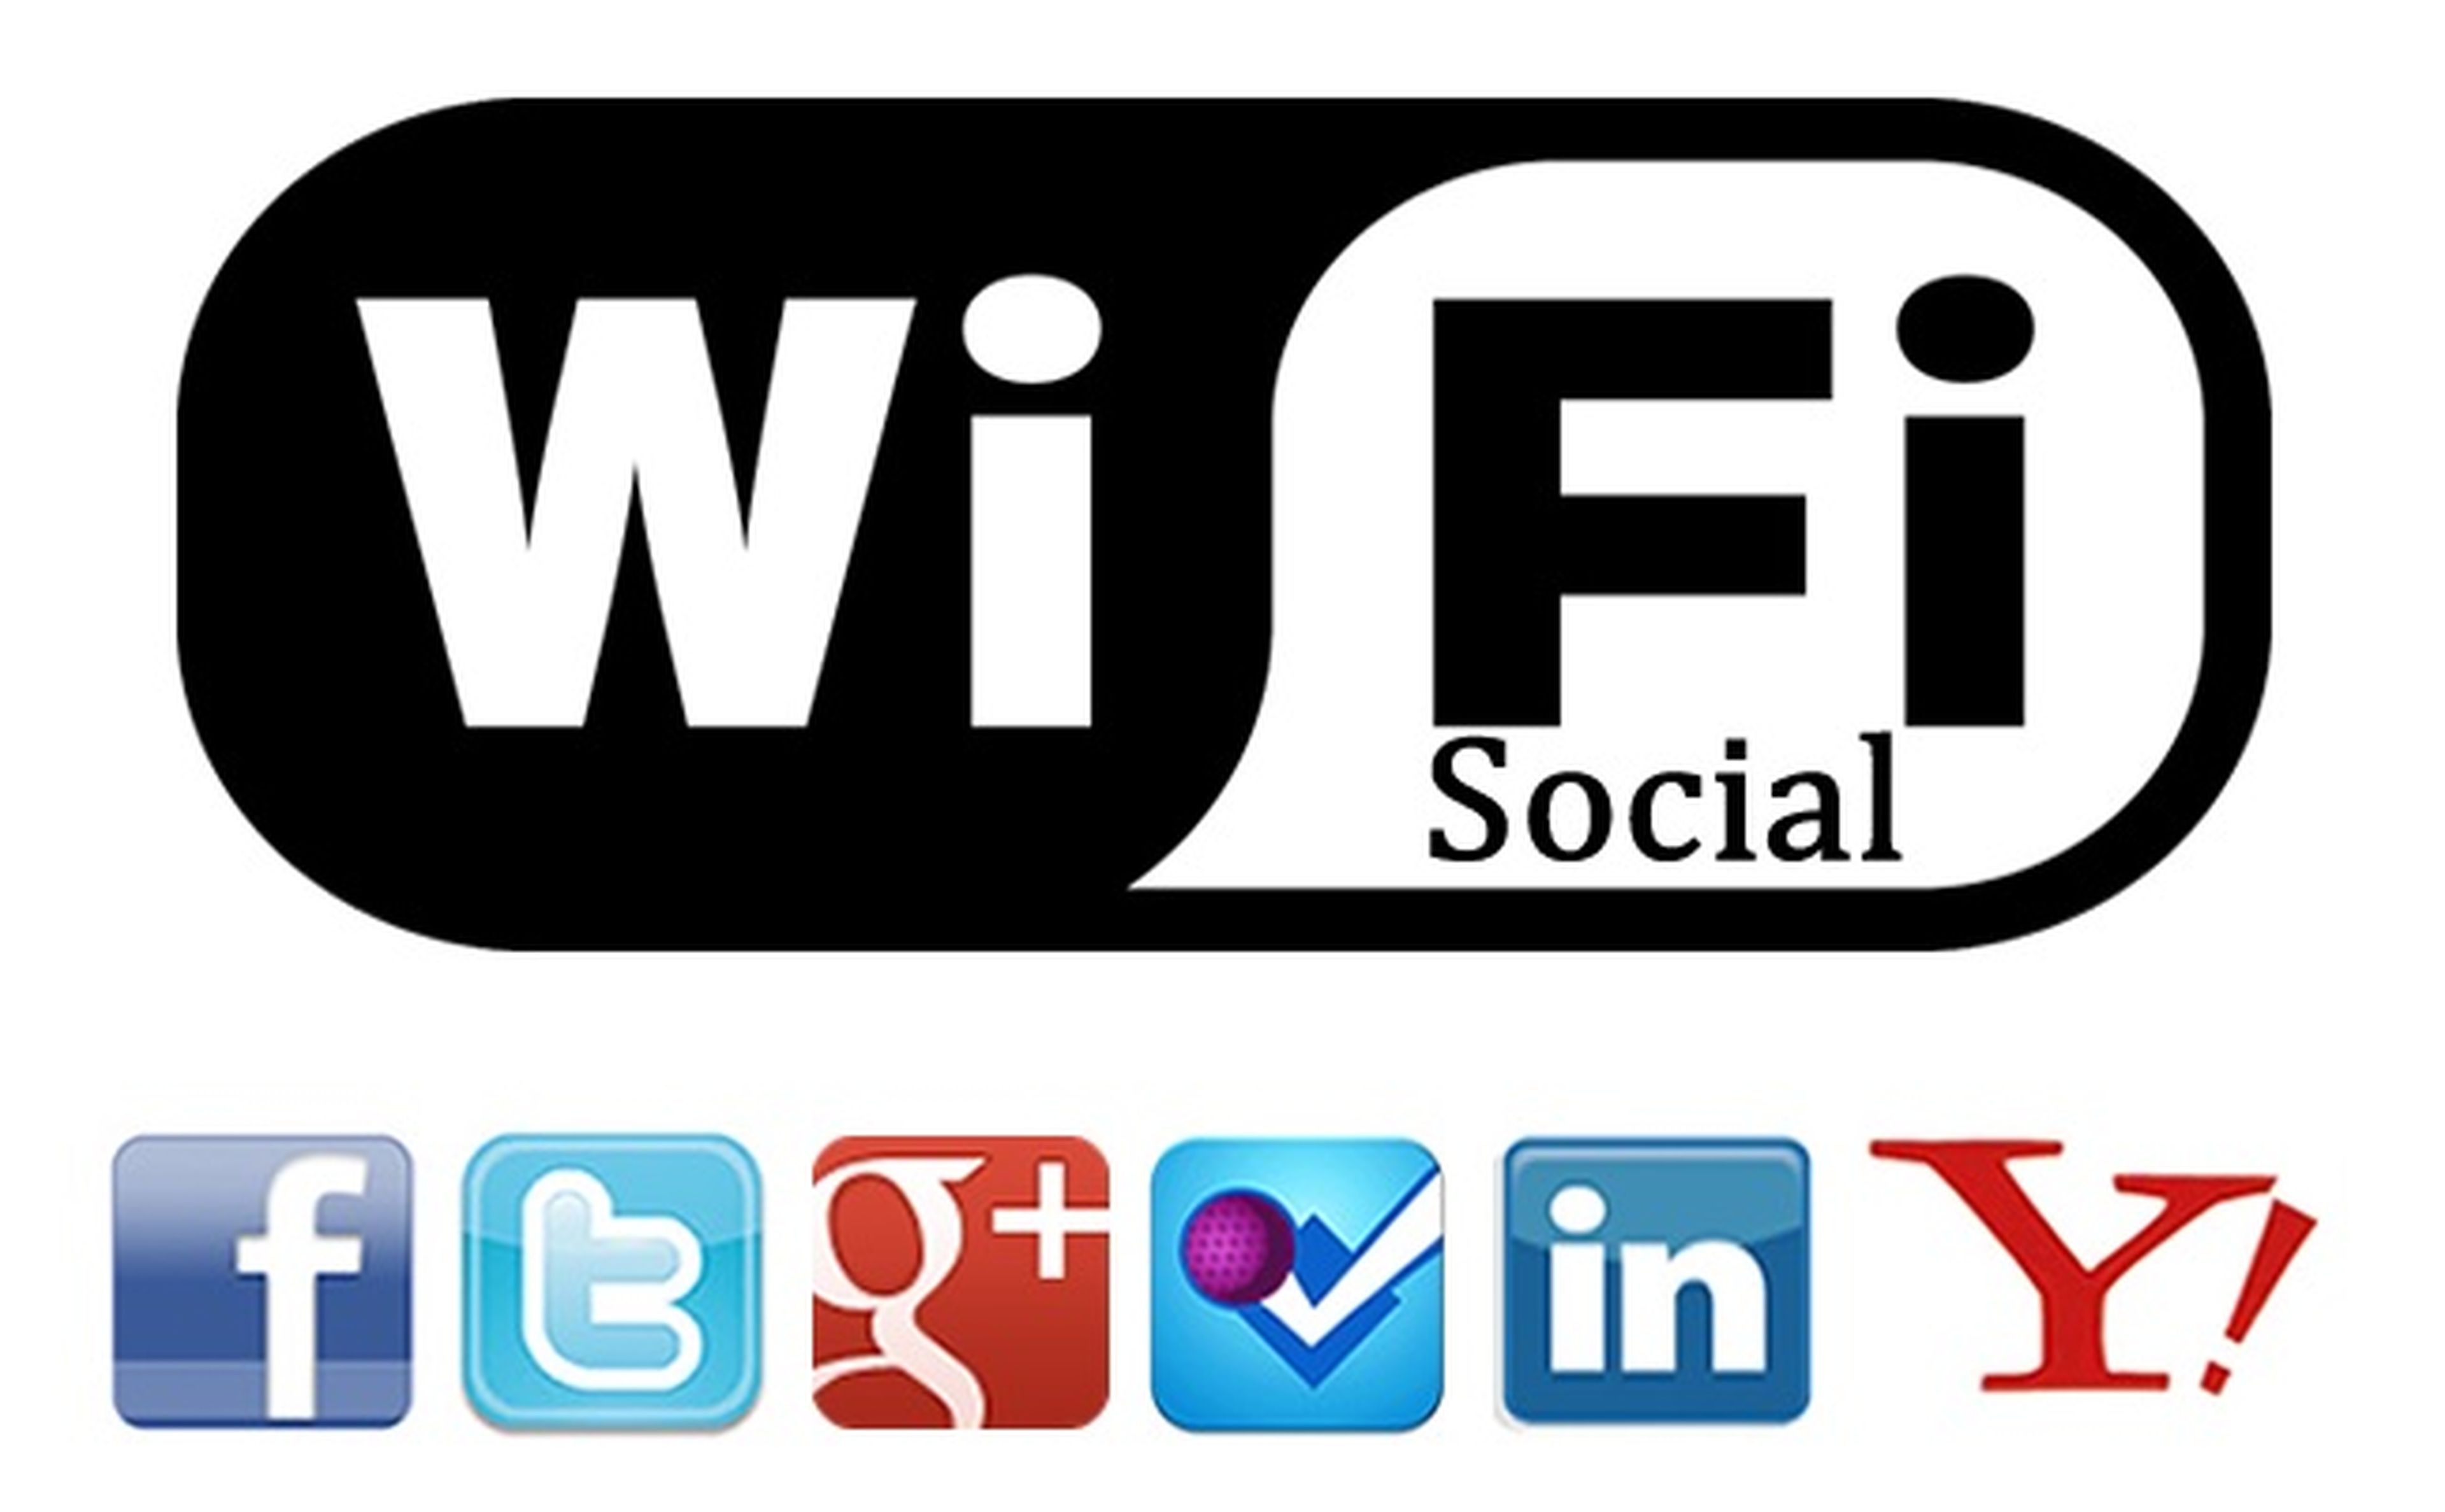 WiFi Social red WiFi redes sociales